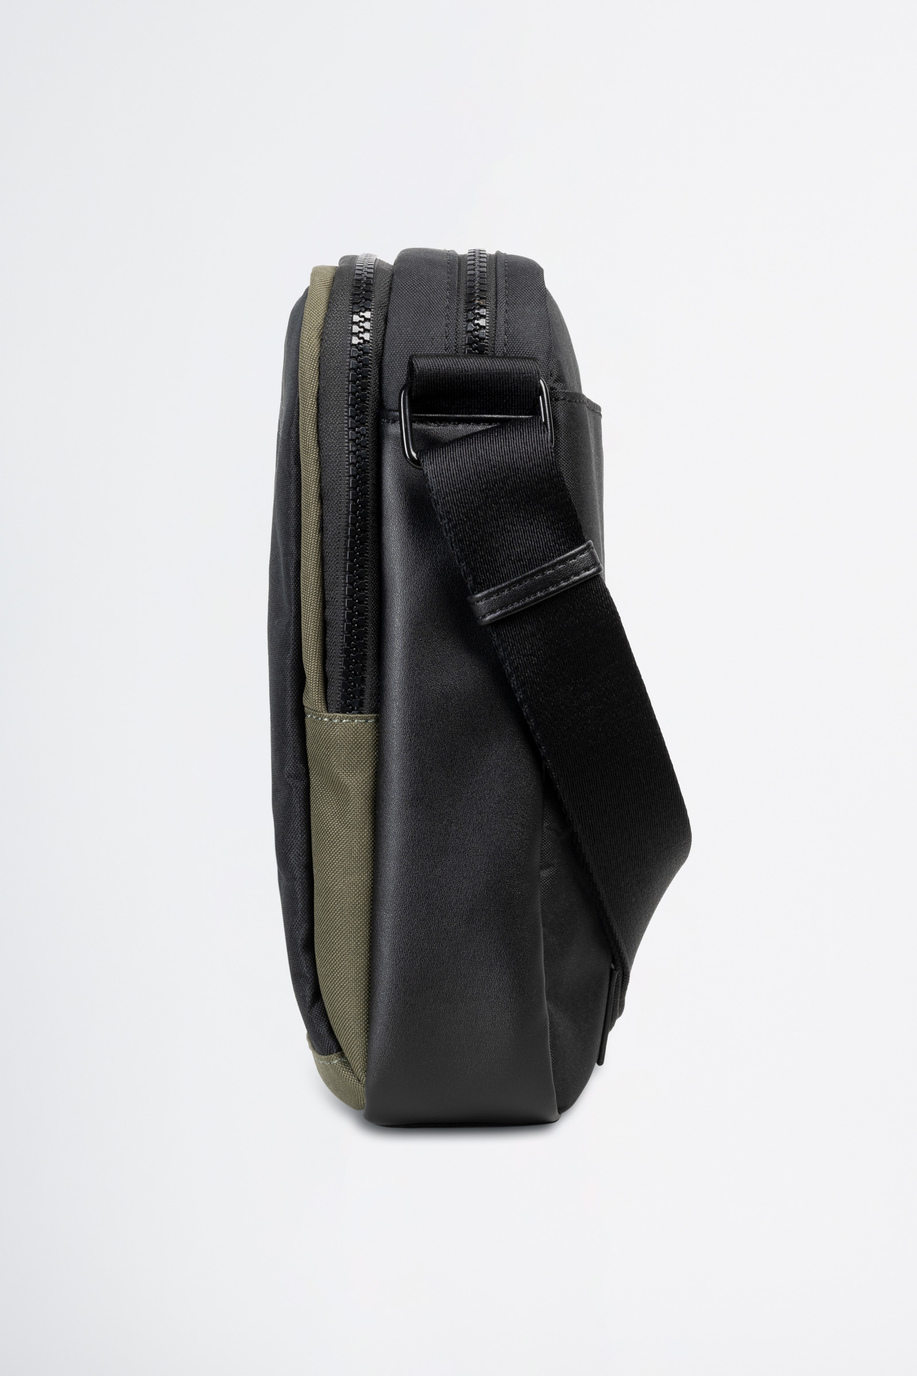 Shoulder bag in fabric - Small gifts for him | La Martina - Official Online Shop